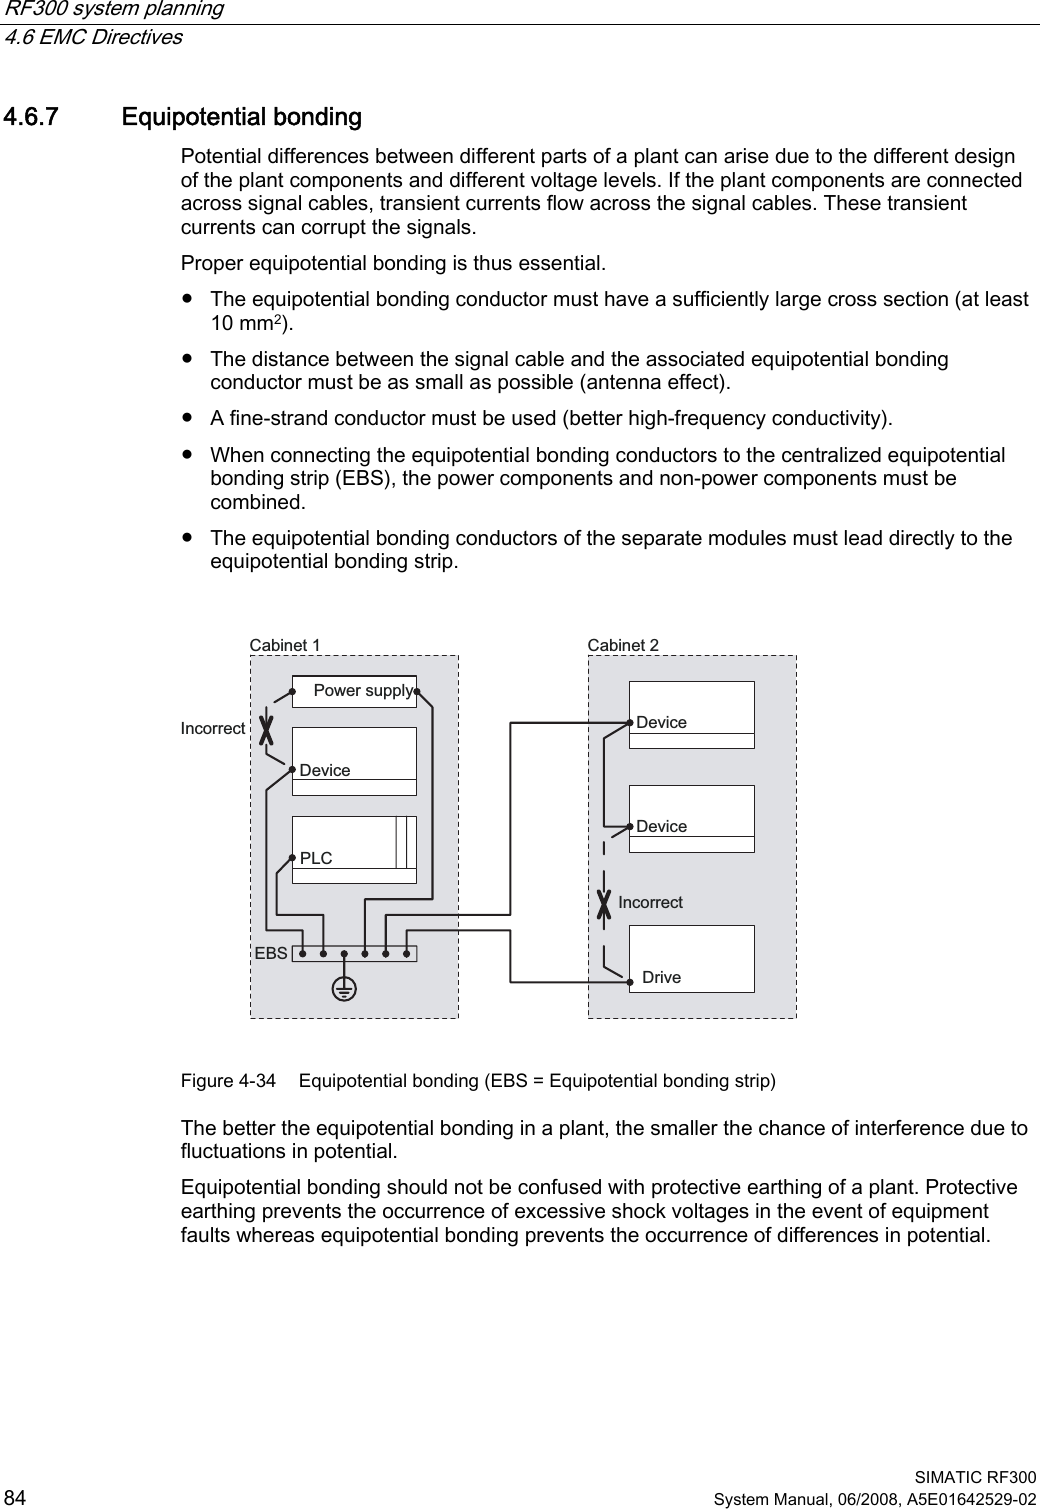 RF300 system planning   4.6 EMC Directives  SIMATIC RF300 84 System Manual, 06/2008, A5E01642529-02 4.6.7 Equipotential bonding Potential differences between different parts of a plant can arise due to the different design of the plant components and different voltage levels. If the plant components are connected across signal cables, transient currents flow across the signal cables. These transient currents can corrupt the signals. Proper equipotential bonding is thus essential.  ● The equipotential bonding conductor must have a sufficiently large cross section (at least 10 mm2). ● The distance between the signal cable and the associated equipotential bonding conductor must be as small as possible (antenna effect). ● A fine-strand conductor must be used (better high-frequency conductivity). ● When connecting the equipotential bonding conductors to the centralized equipotential bonding strip (EBS), the power components and non-power components must be combined. ● The equipotential bonding conductors of the separate modules must lead directly to the equipotential bonding strip.  &amp;DELQHW &amp;DELQHW,QFRUUHFW3RZHUVXSSO\&apos;ULYH&apos;HYLFH3/&amp;(%6&apos;HYLFH&apos;HYLFH,QFRUUHFW Figure 4-34  Equipotential bonding (EBS = Equipotential bonding strip) The better the equipotential bonding in a plant, the smaller the chance of interference due to fluctuations in potential. Equipotential bonding should not be confused with protective earthing of a plant. Protective earthing prevents the occurrence of excessive shock voltages in the event of equipment faults whereas equipotential bonding prevents the occurrence of differences in potential. 